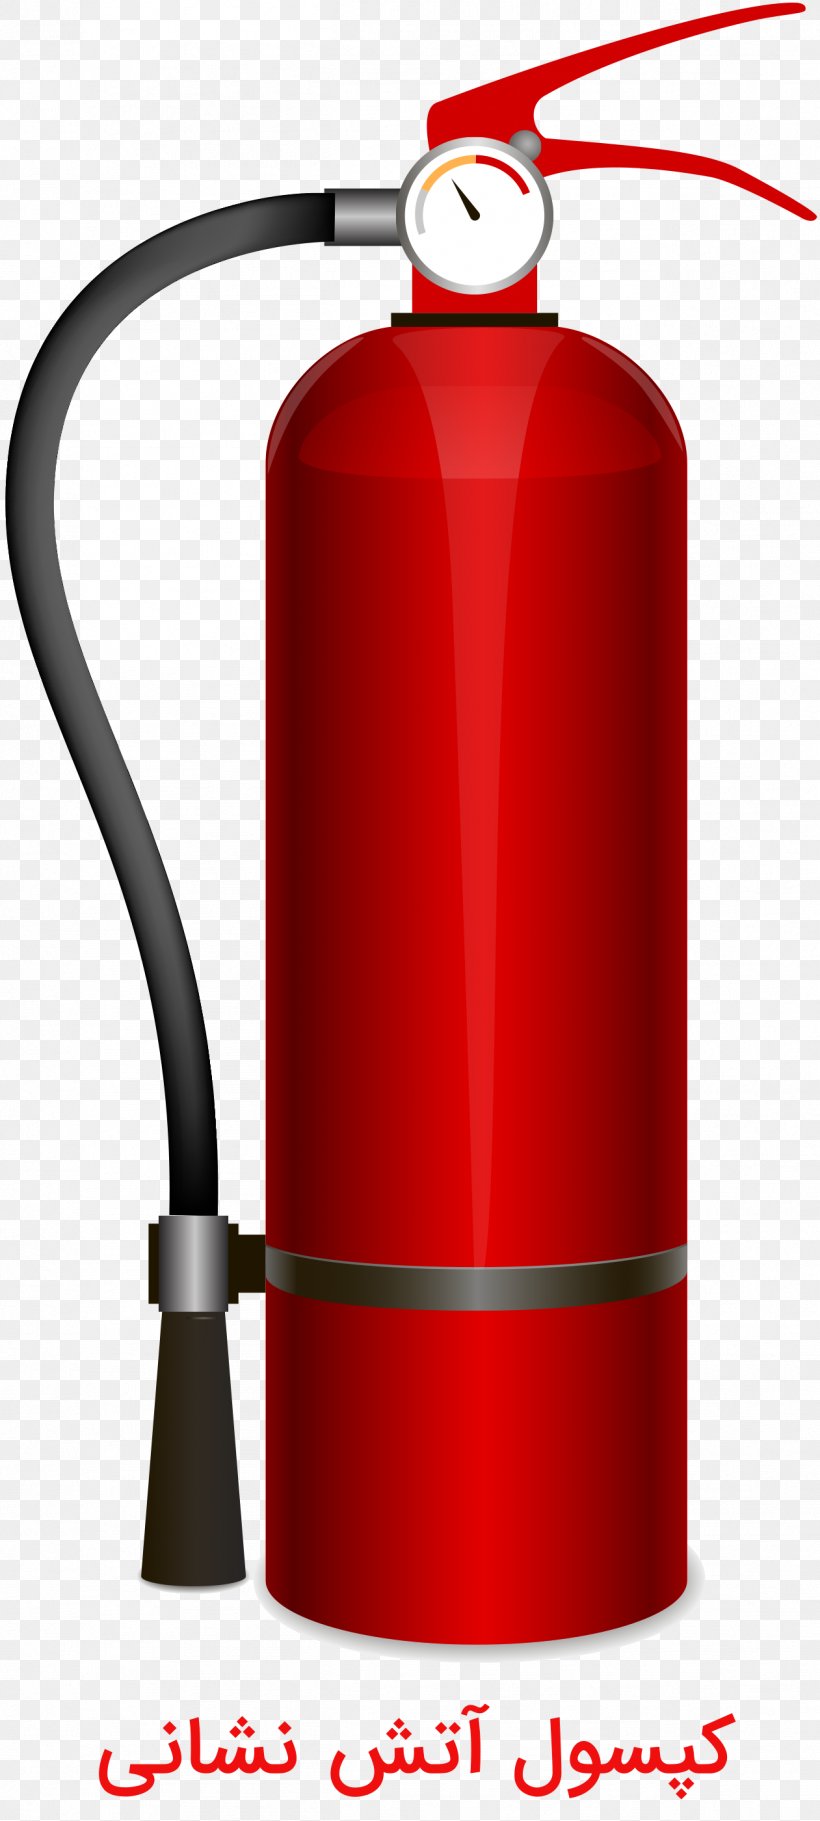 Fire Extinguishers Active Fire Protection Conflagration, PNG, 1261x2801px, Fire Extinguishers, Active Fire Protection, Carbon Dioxide, Condensed Aerosol Fire Suppression, Conflagration Download Free